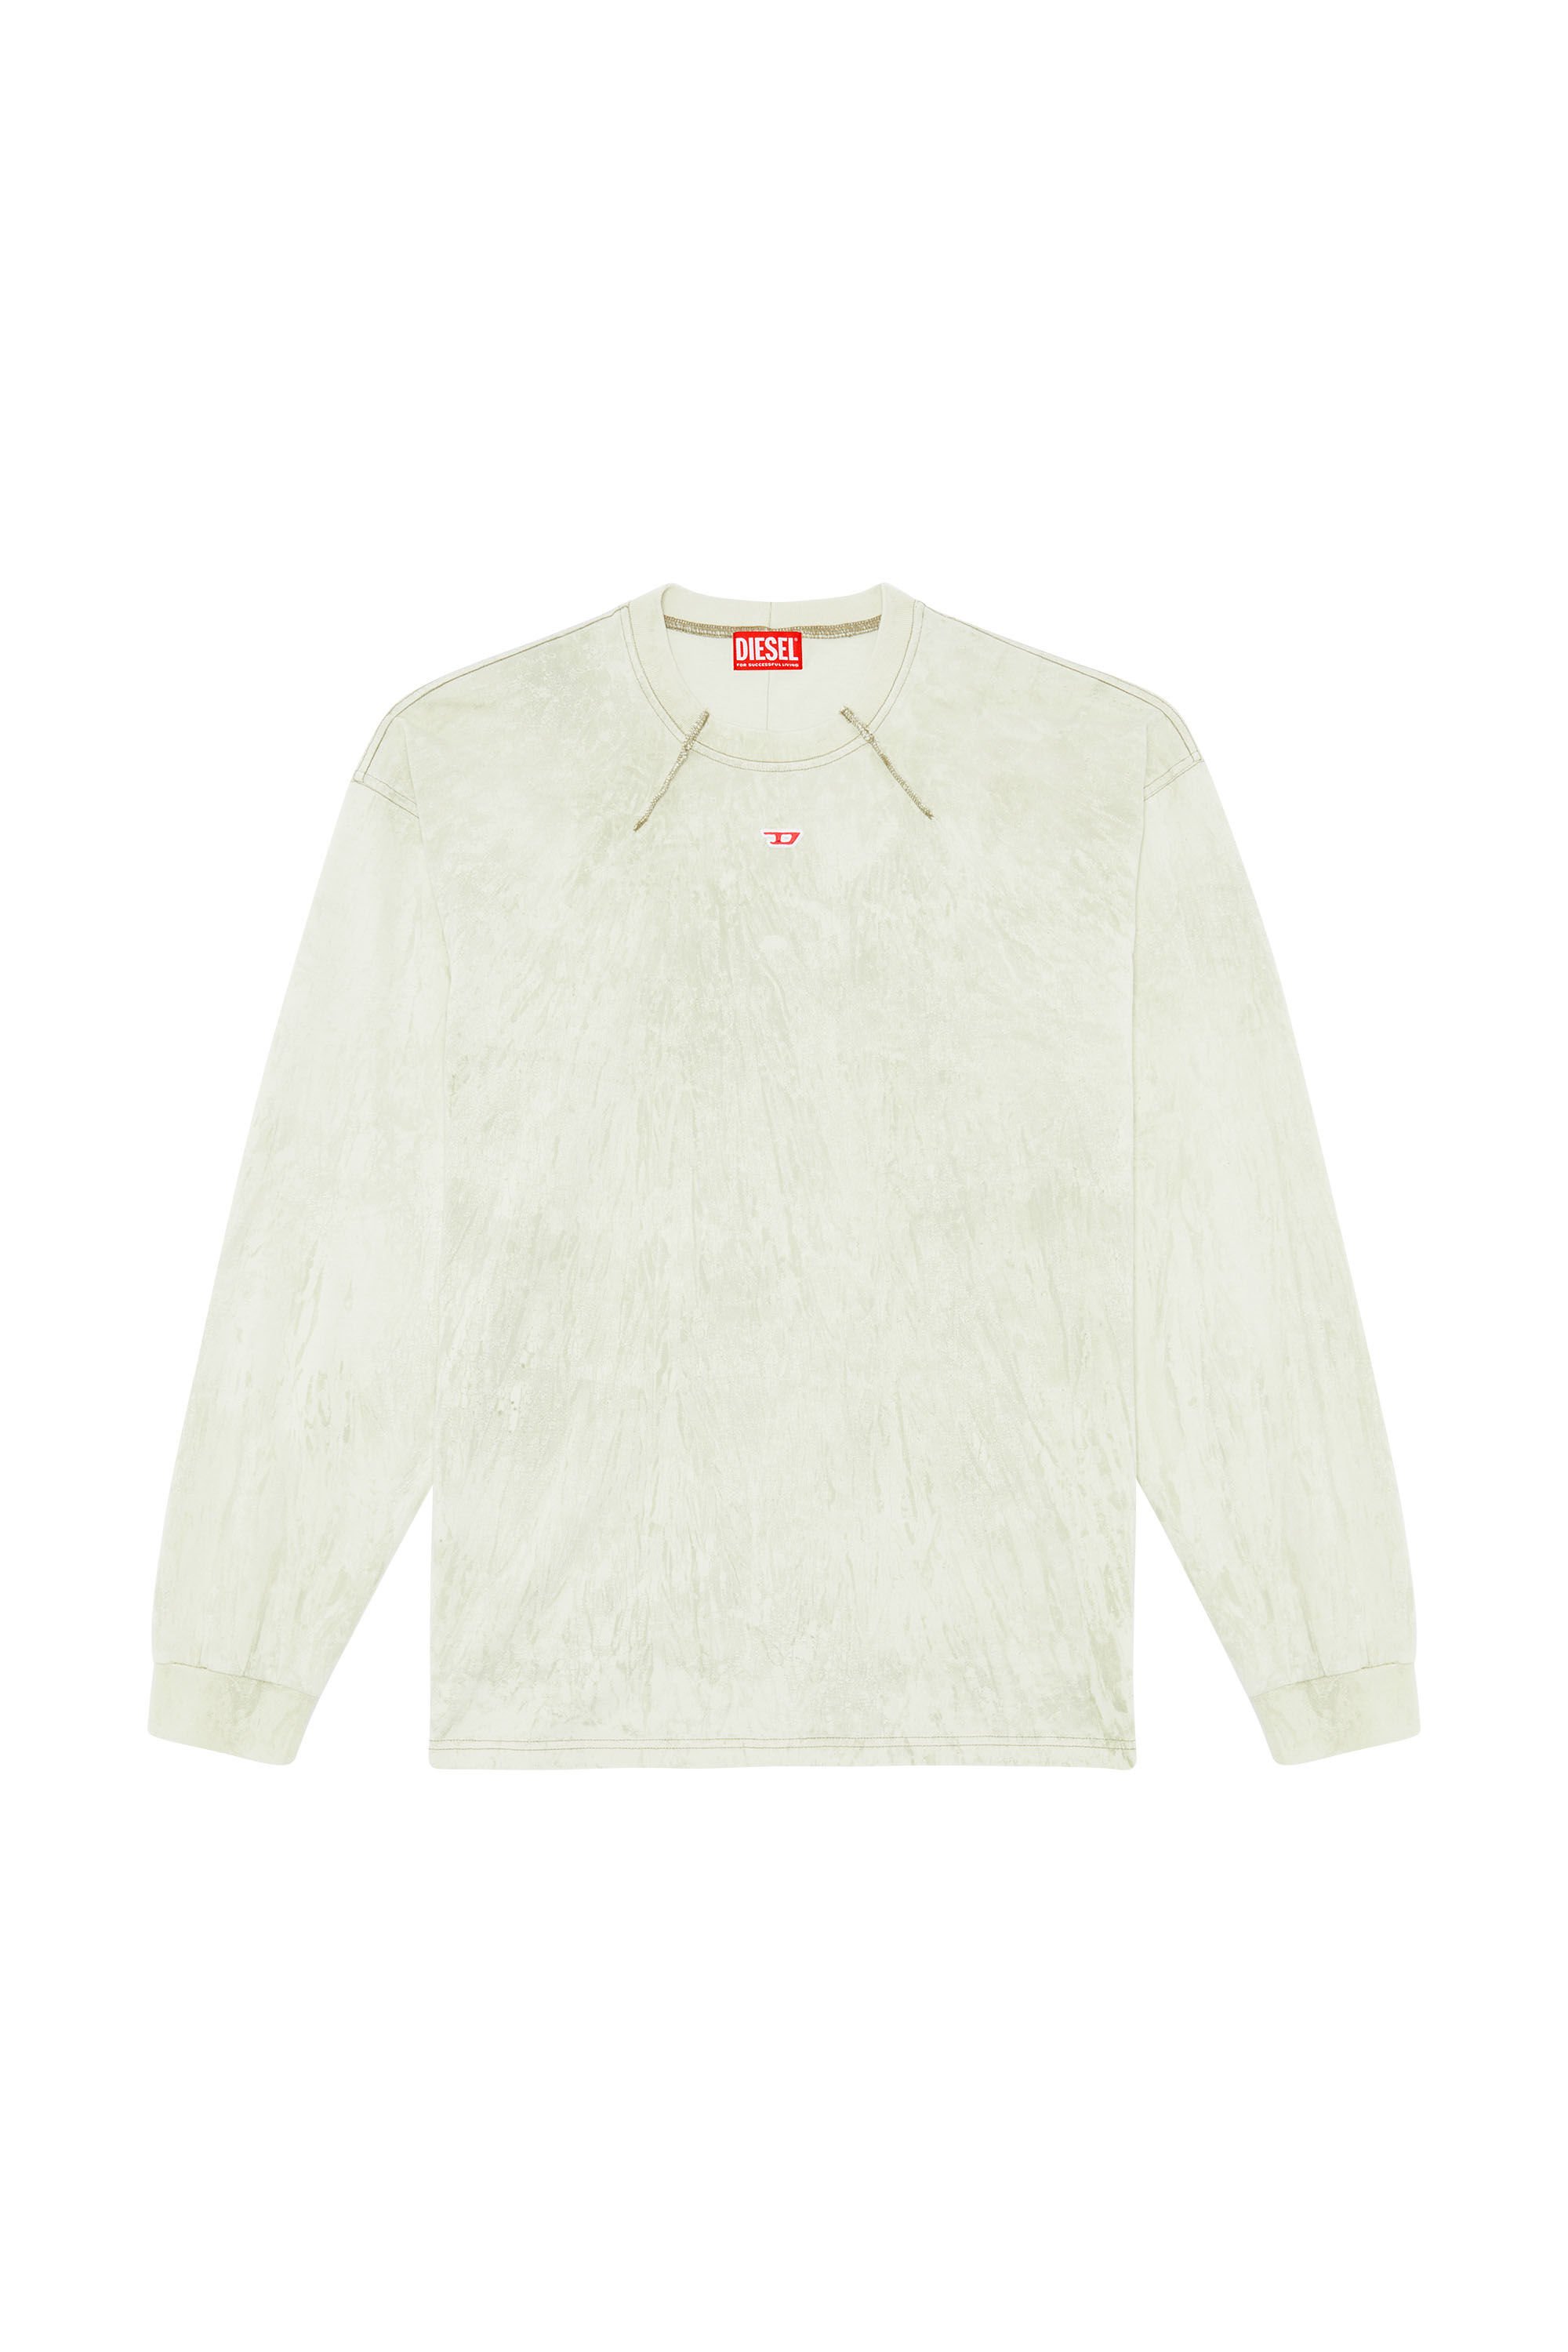 Diesel - T-COS-LS, Man Long-sleeve T-shirt in plaster jersey in White - Image 2